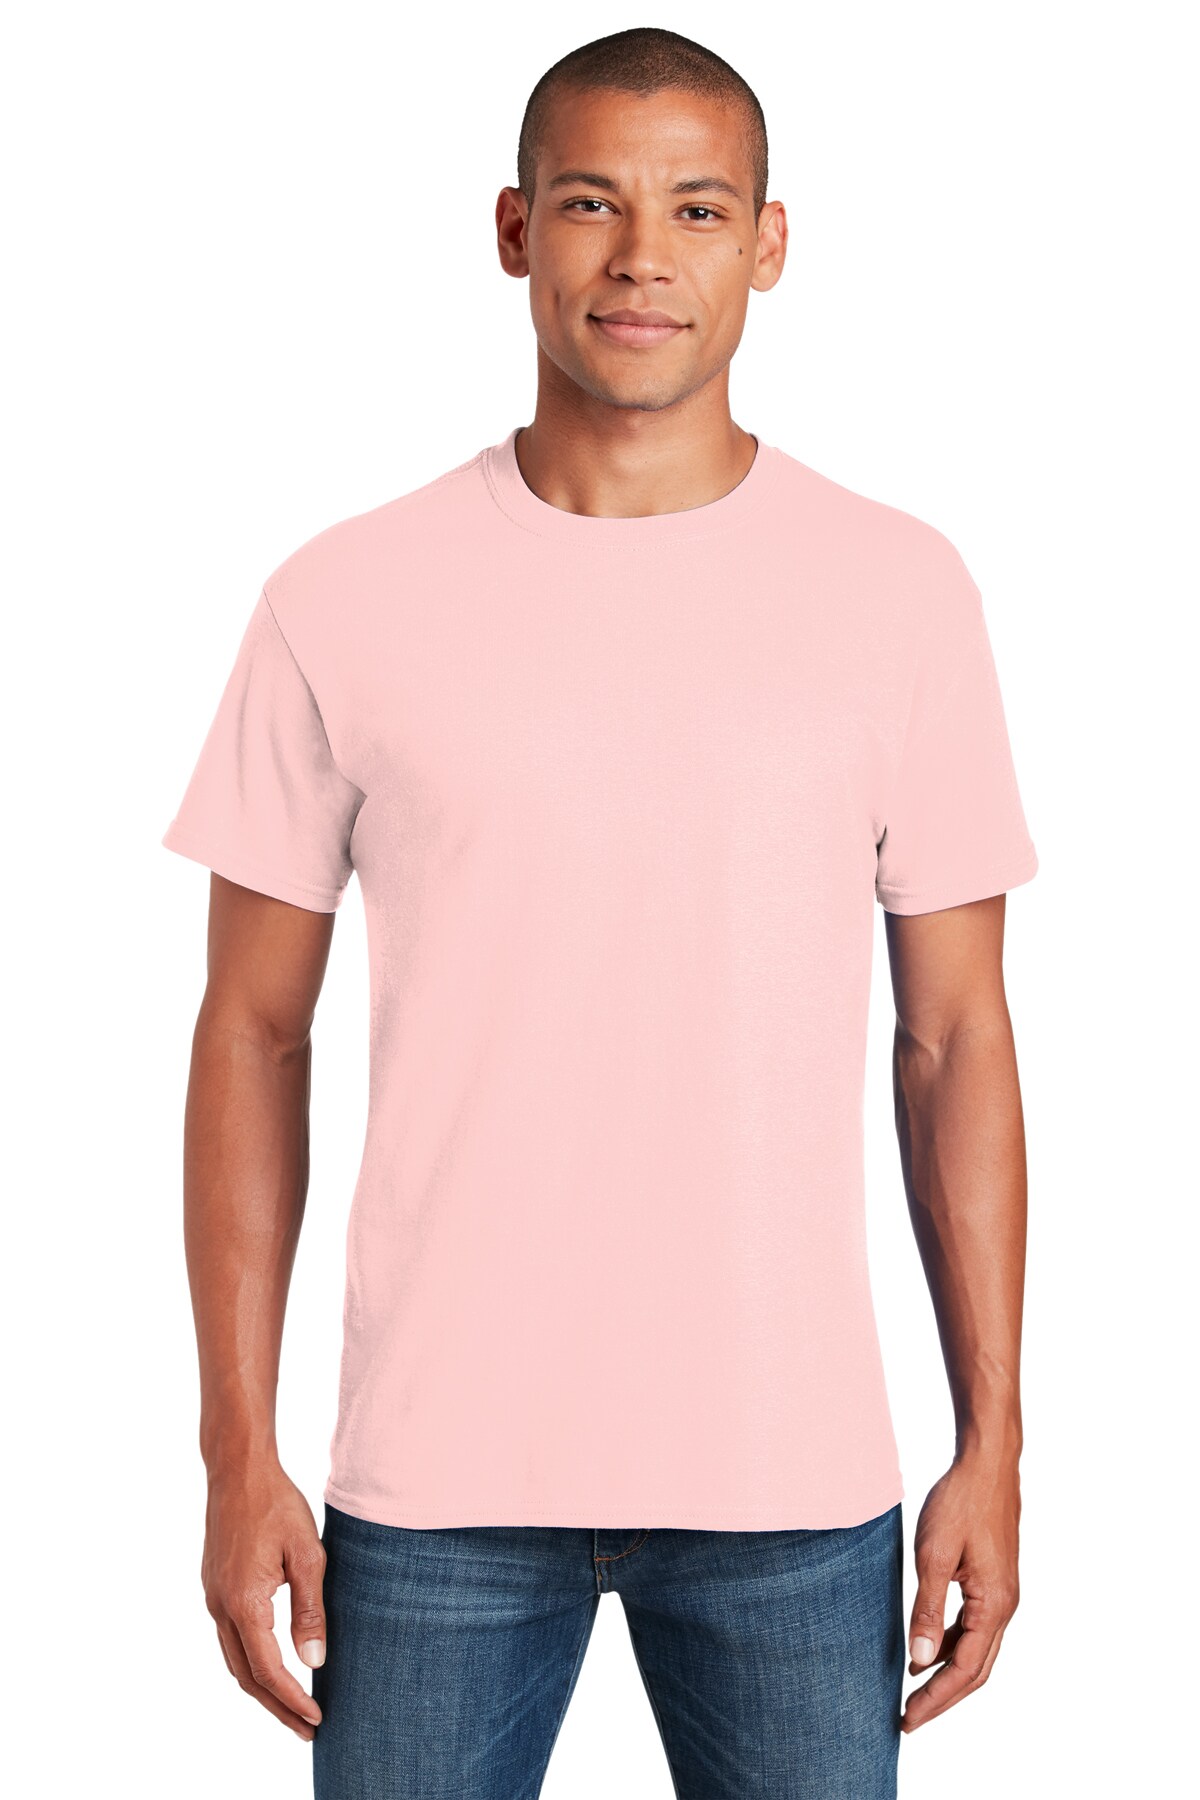 Premium Blank Men's Tees for Every Occasion